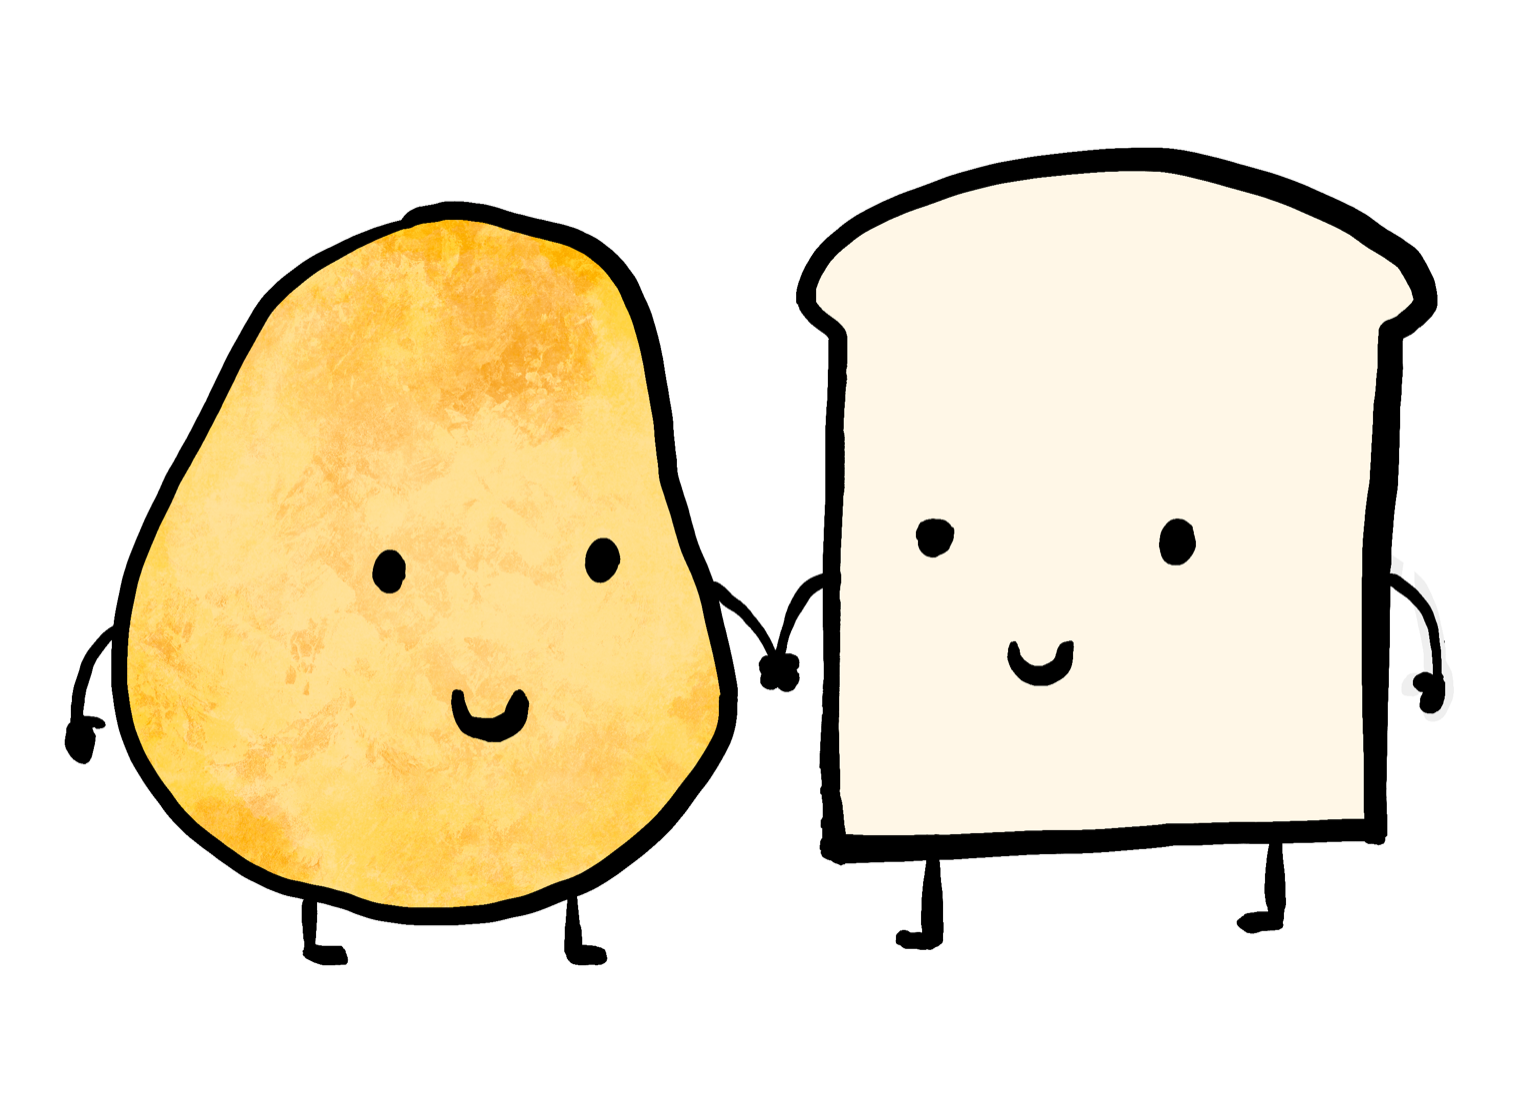 A crisp and a slice of bread happily holding hands